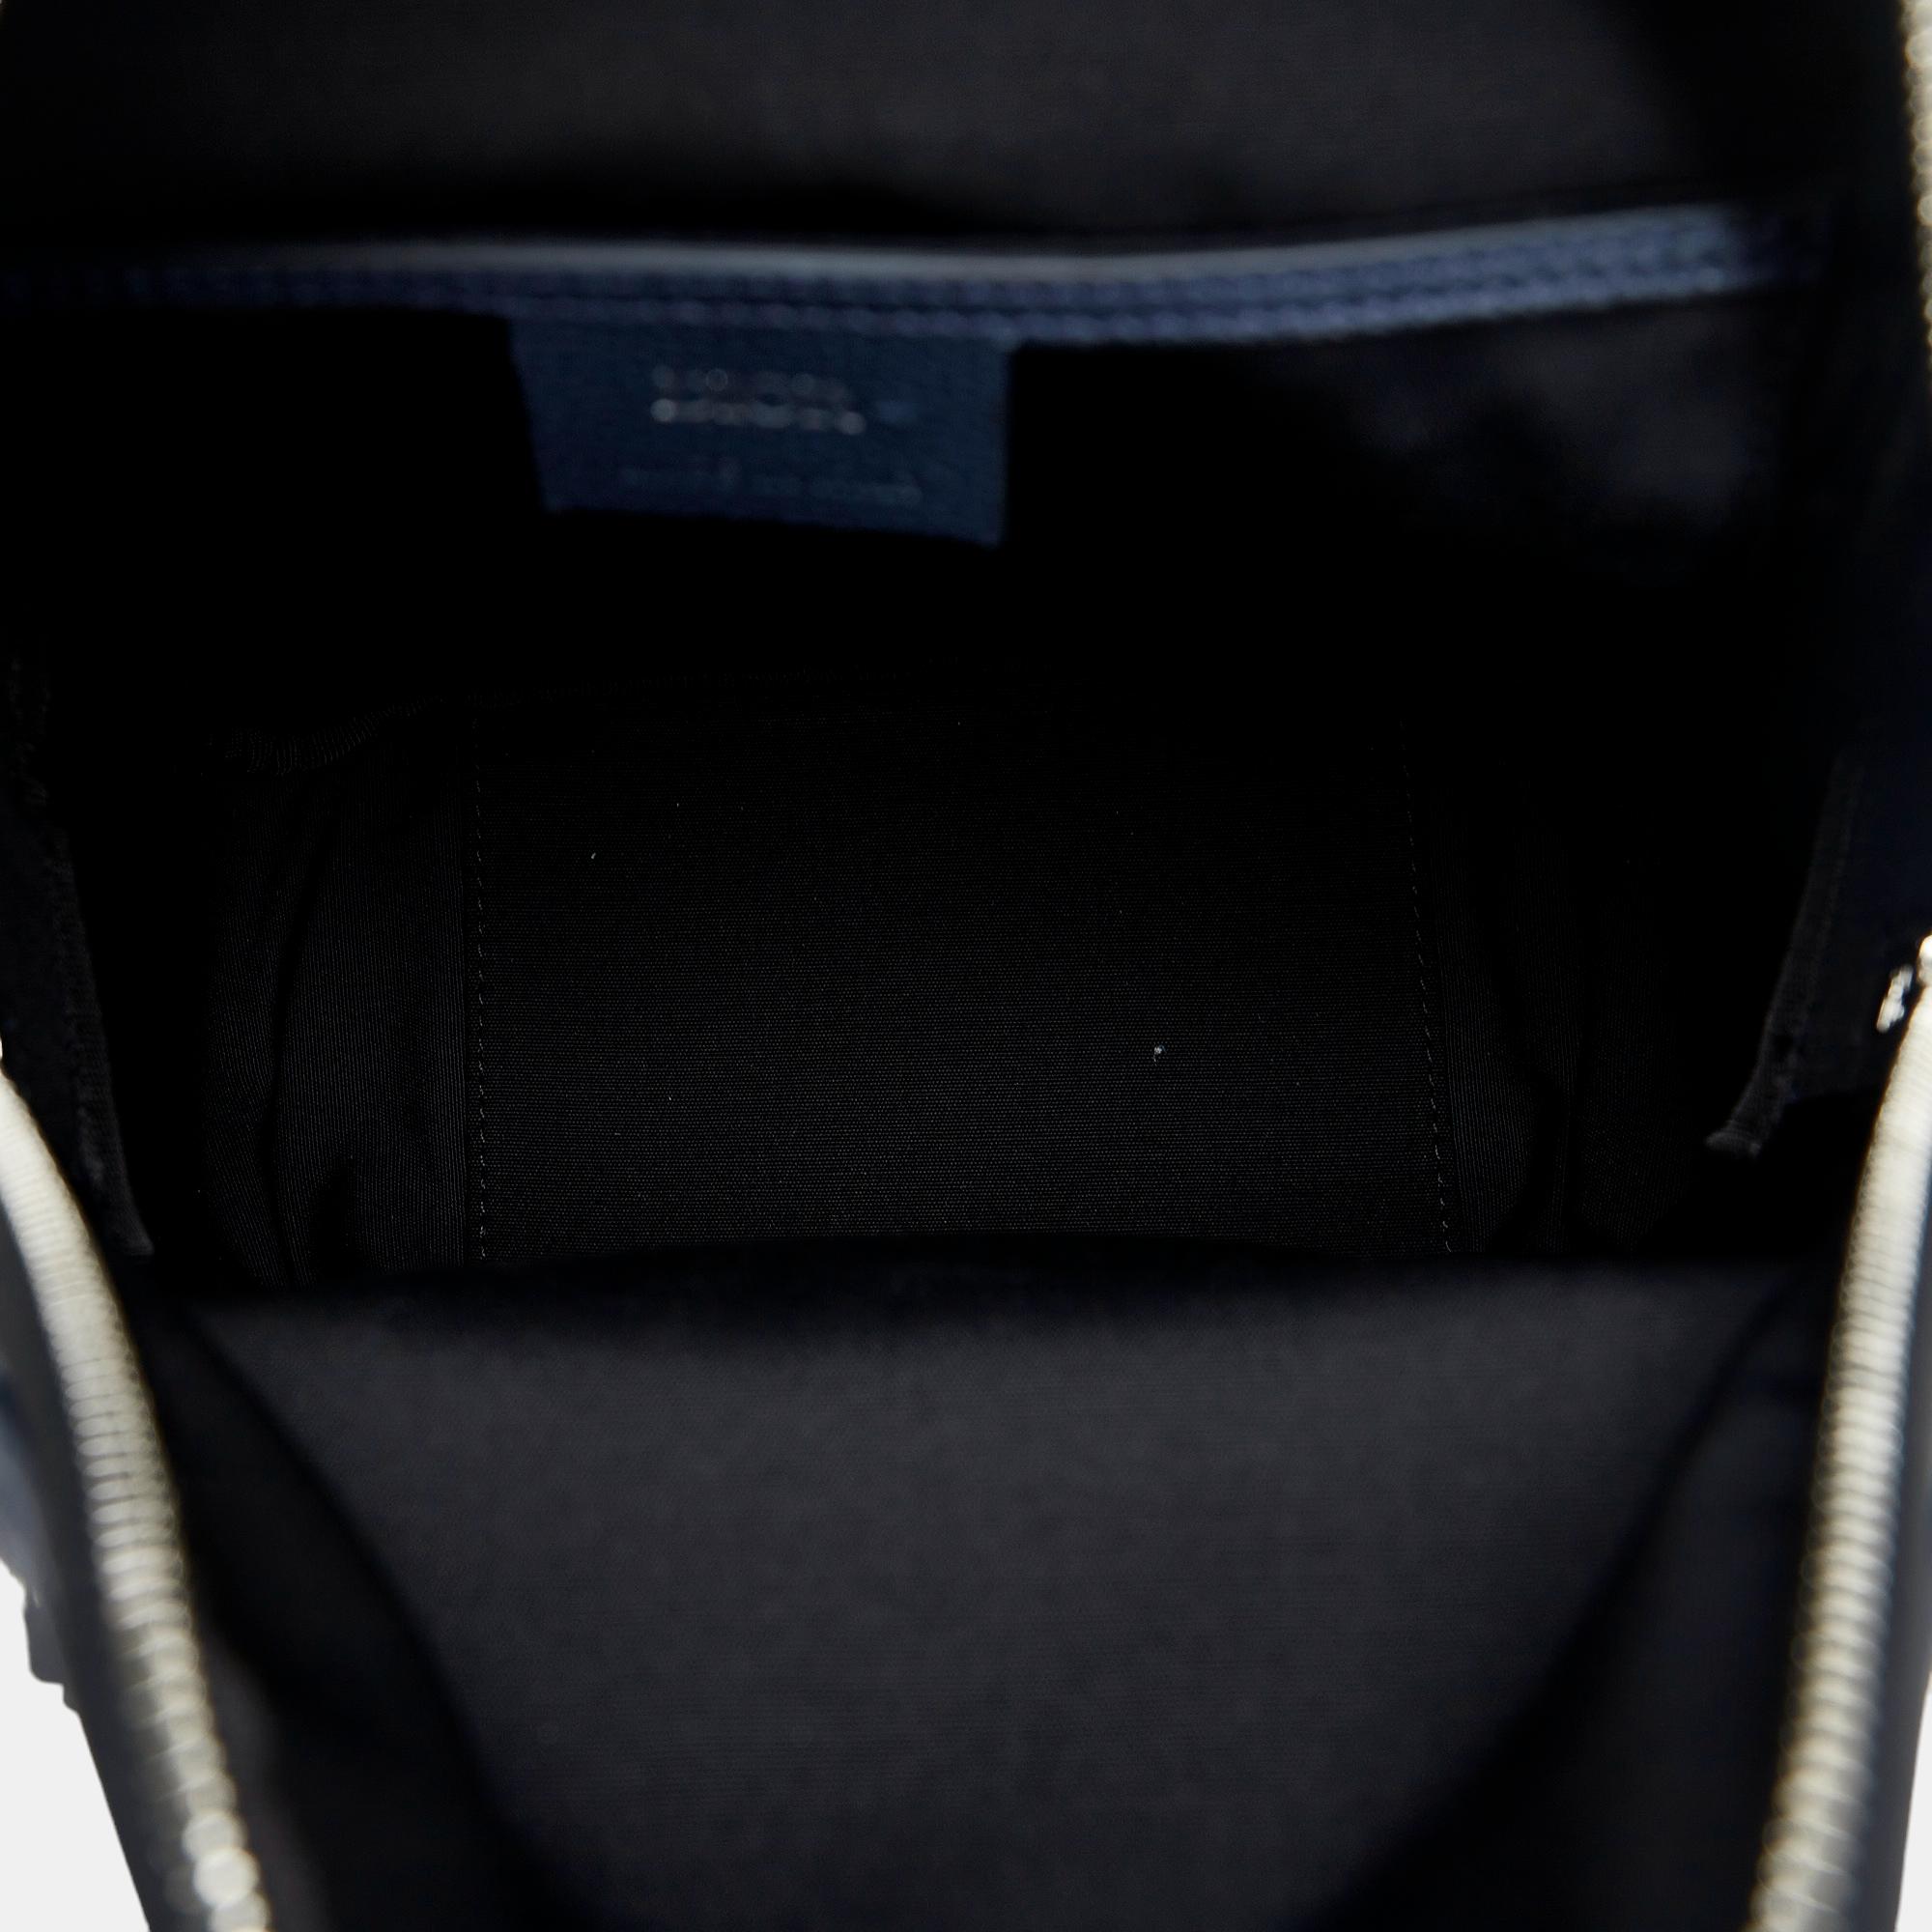 Dior Navy Blue X Shawn Stussy Year Of The Ox Sling